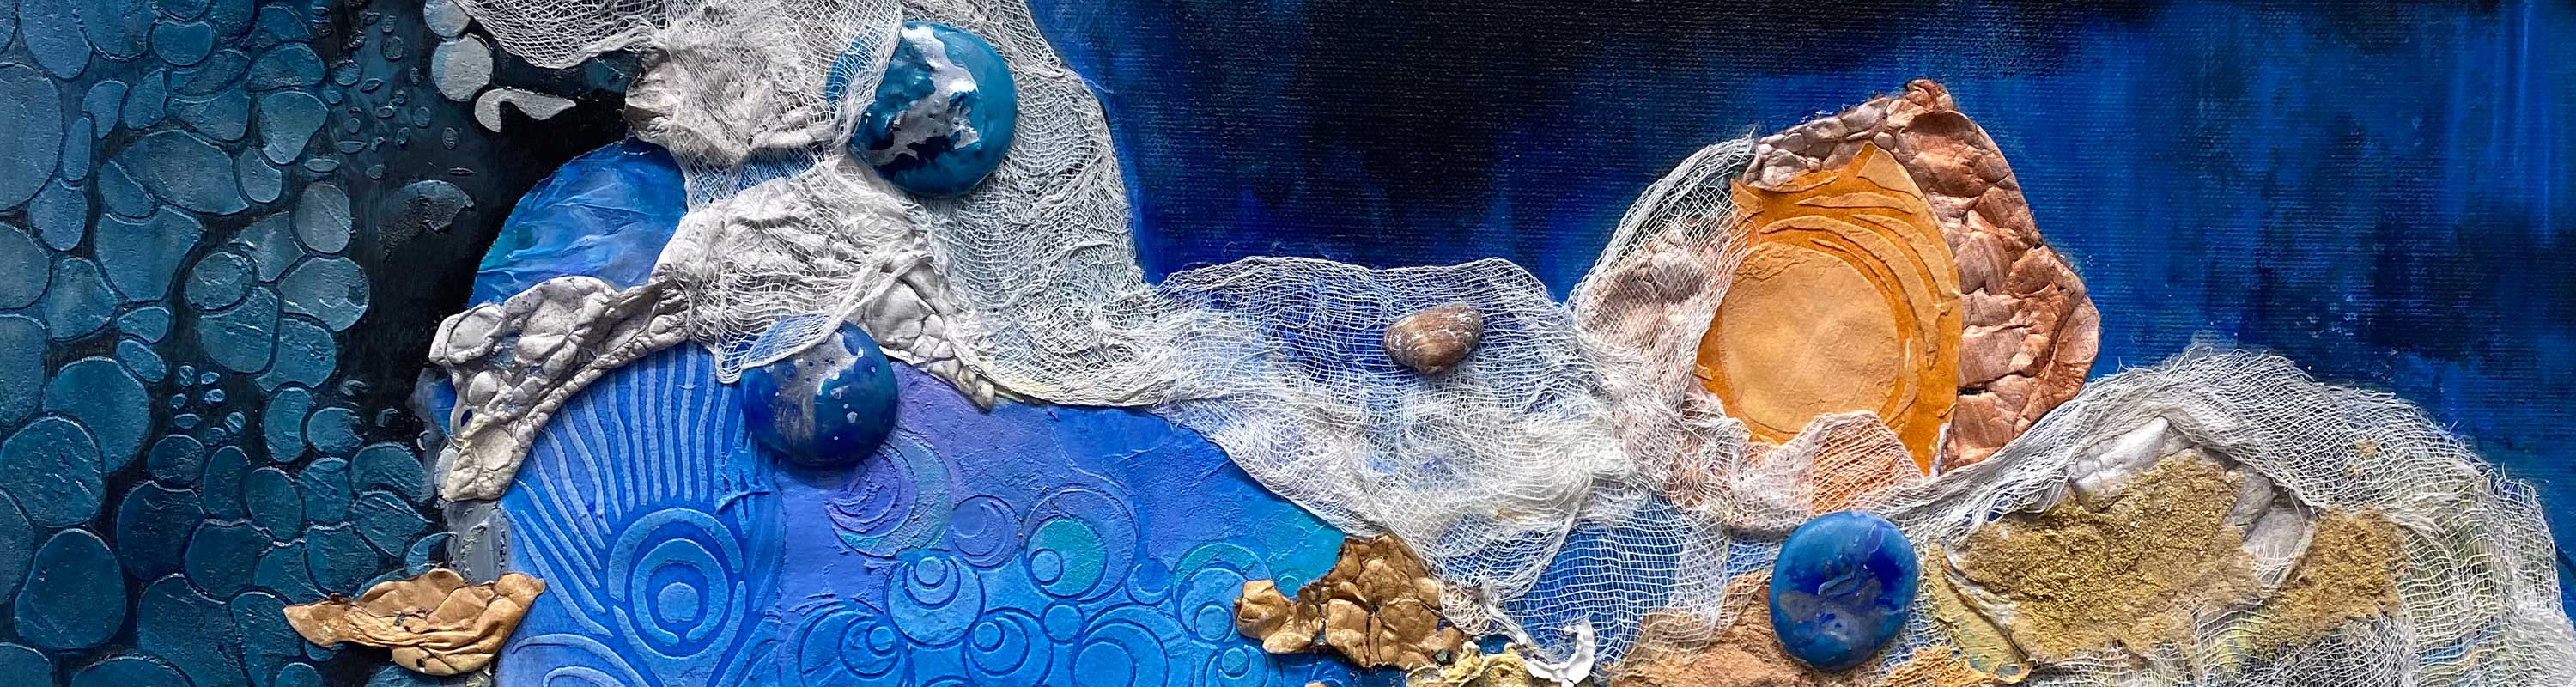 mixed media artwork depicting under water elements, a net, and shells